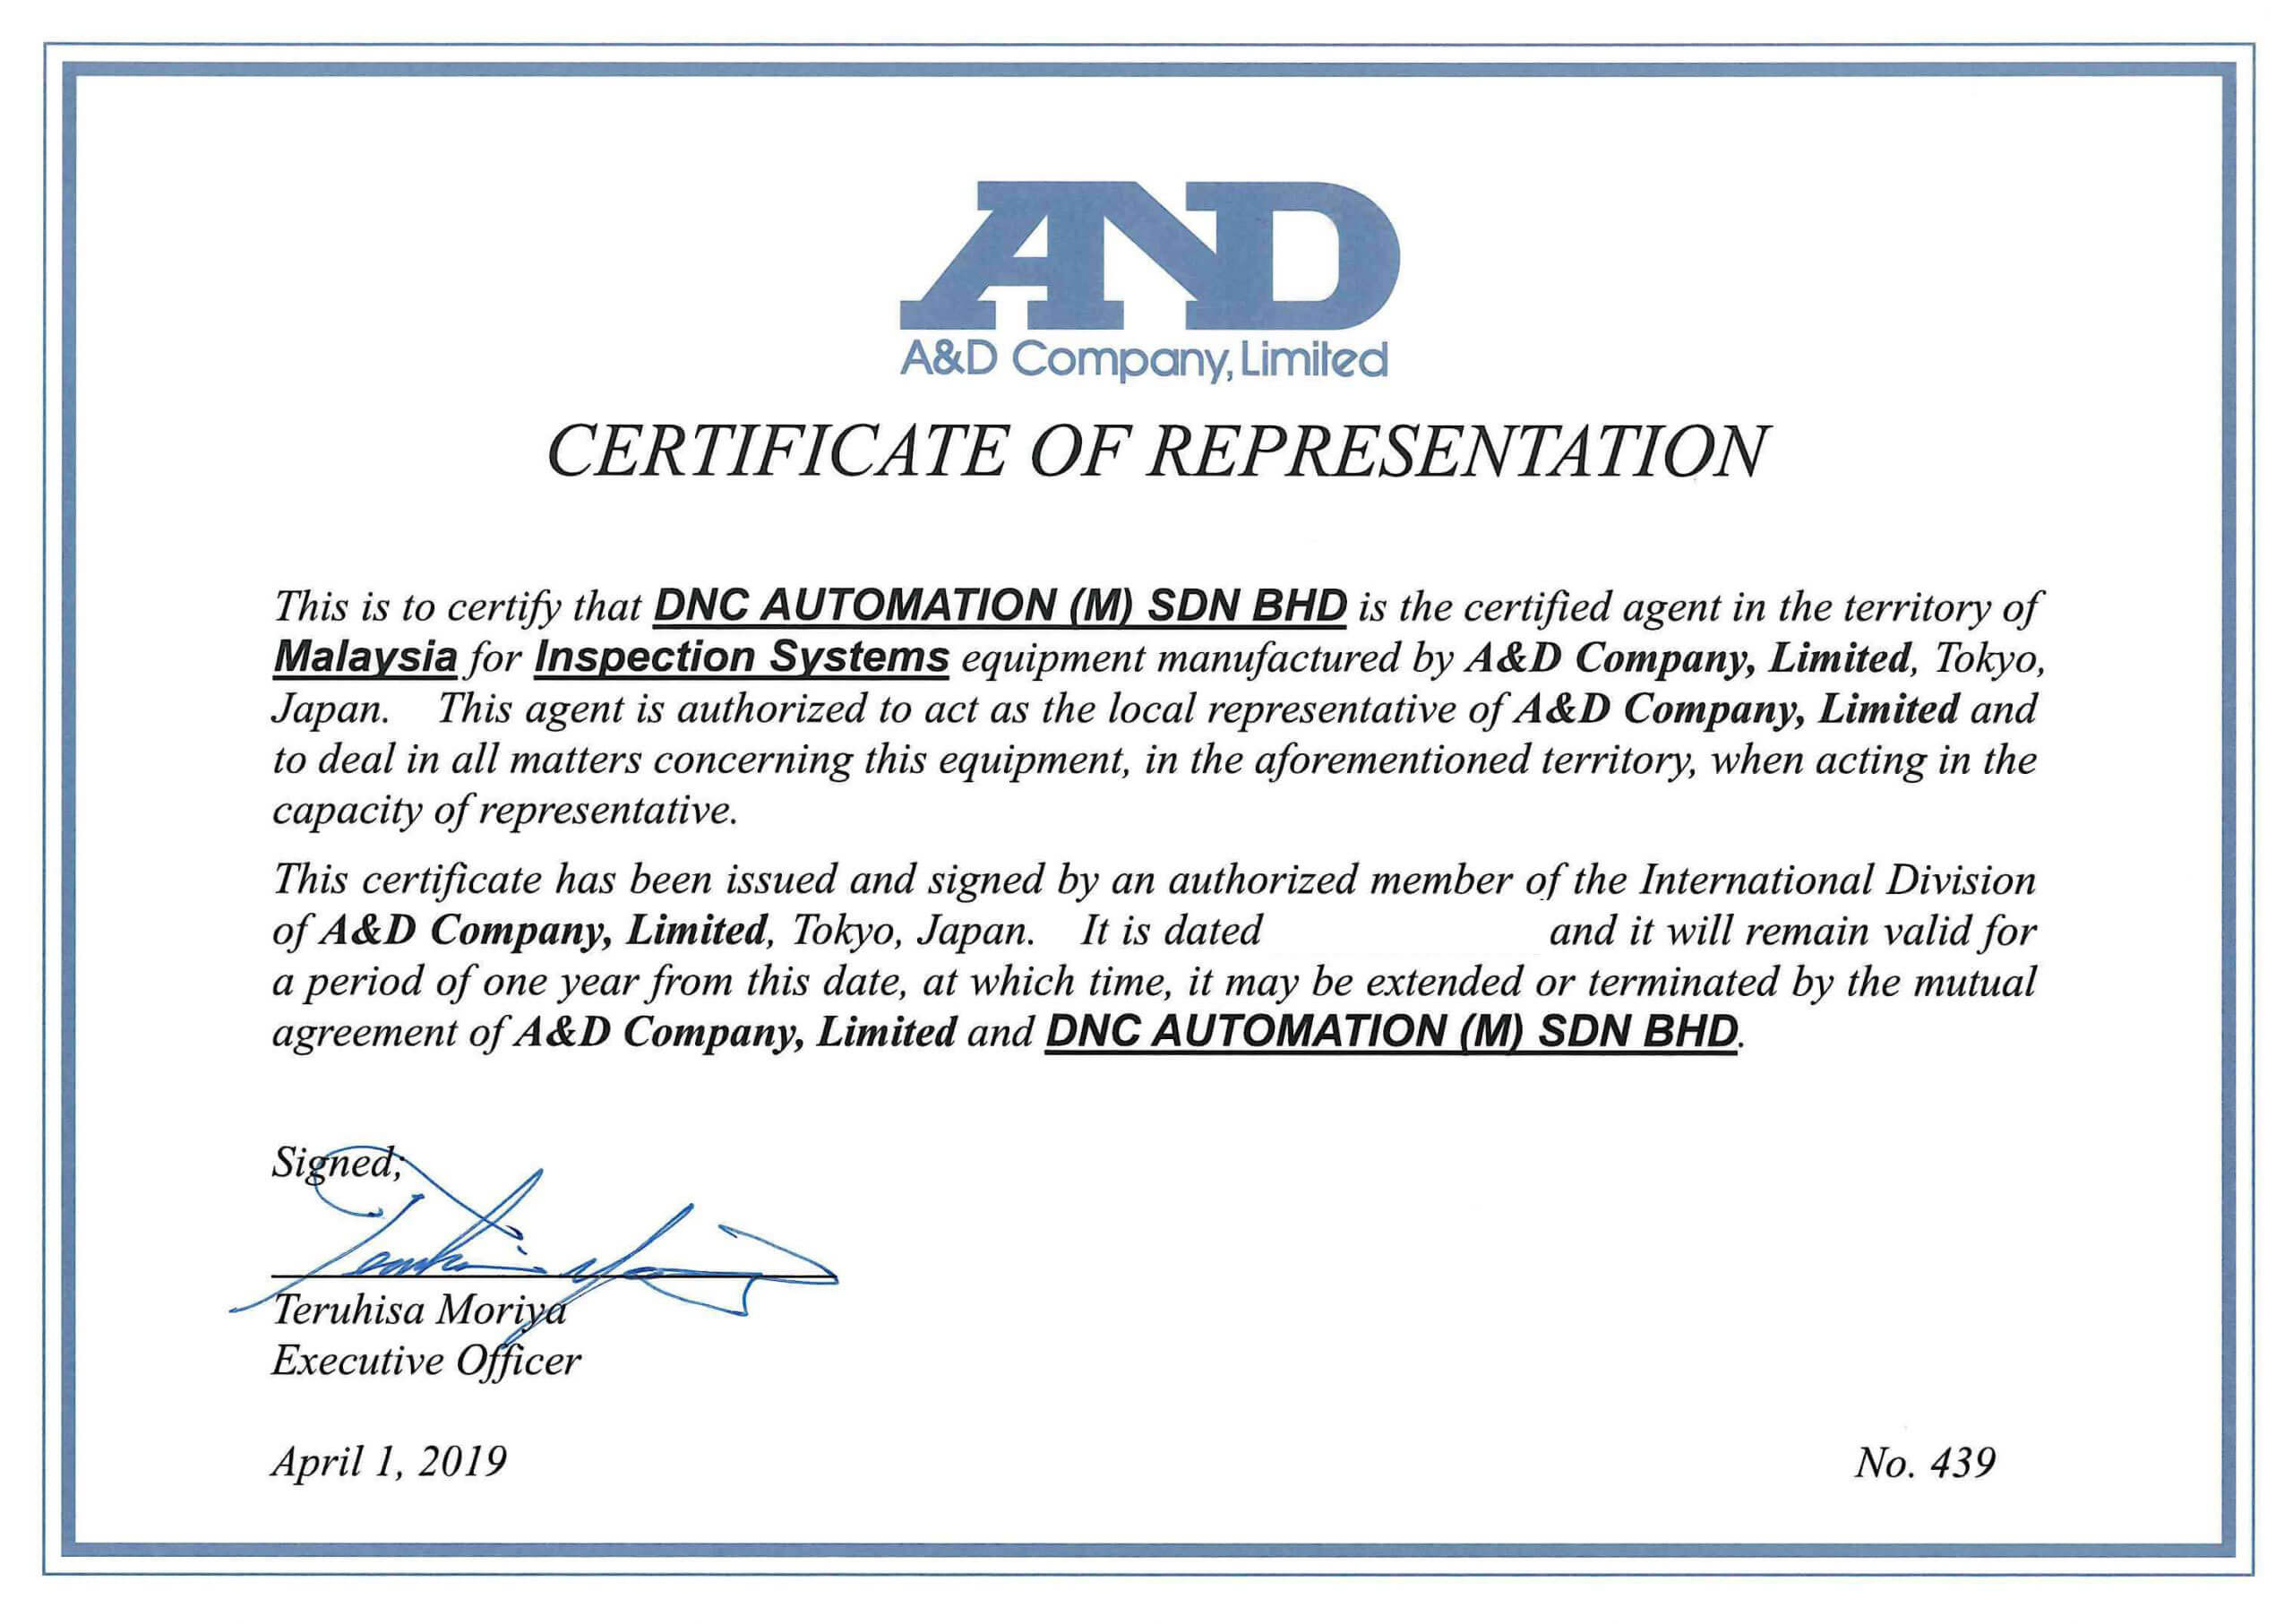 OFFICIAL CERTIFIED AGENT FOR A&D